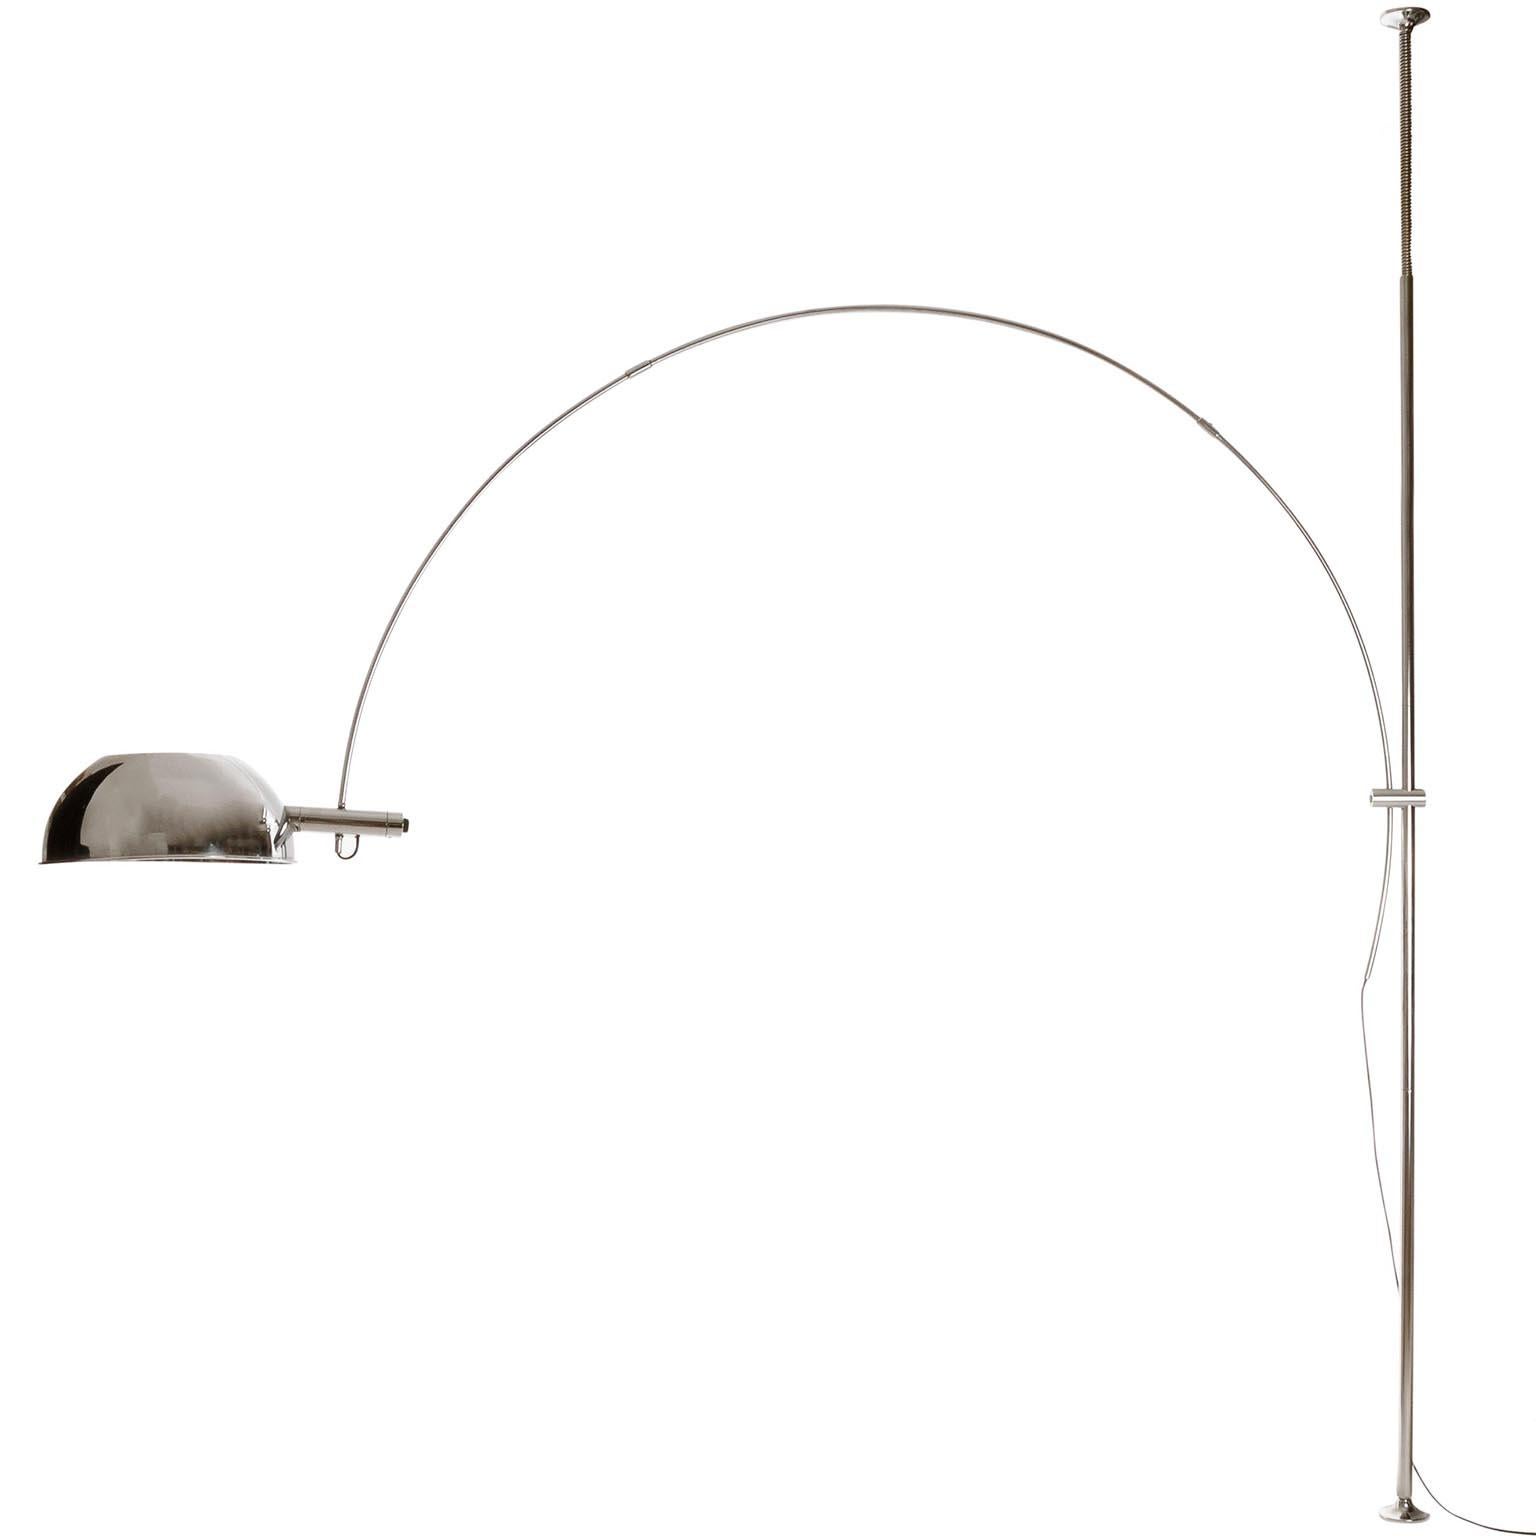 A ceiling to floor lamp by Florian Schulz, Germany, manufactured in midcentury, circa 1970 (late 1960s or early 1970s).
It is made of polished nickel plated brass and metal. The inner side of the lampshade is brushed.
The fixture is clamped